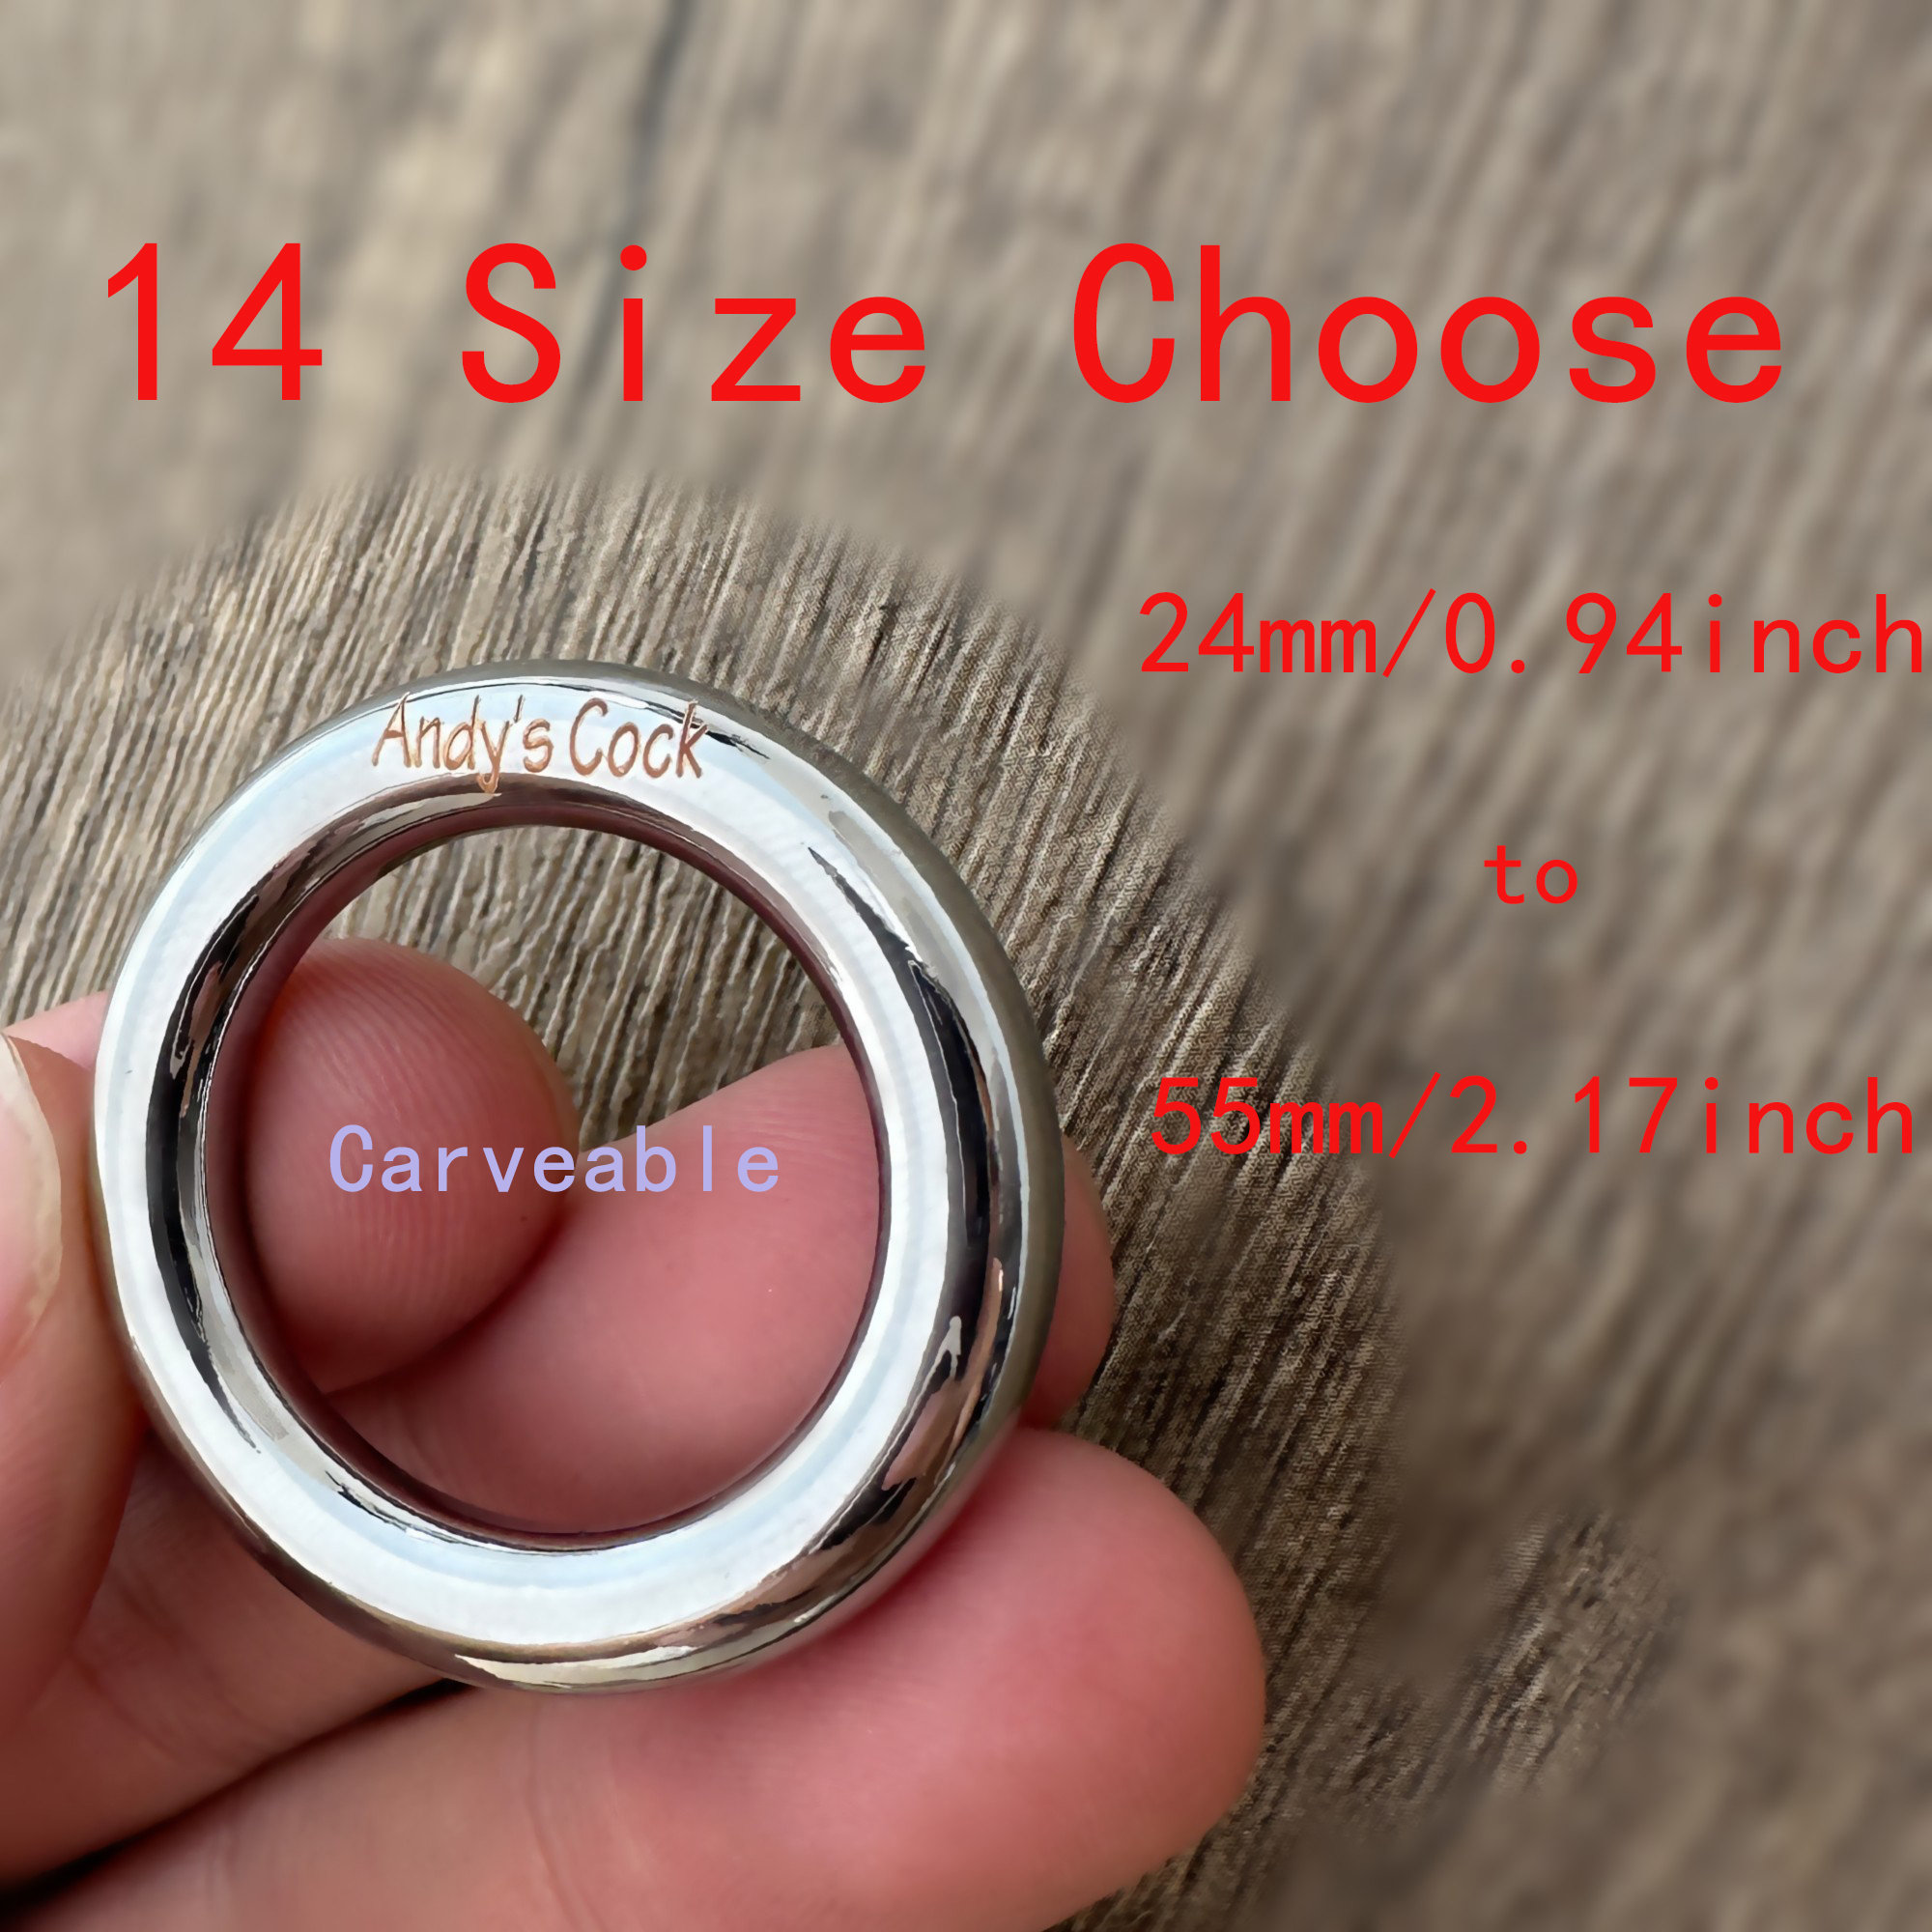 33mm Stainless Steel Penis Cock Ring Glans Penis Stretch Scrotum